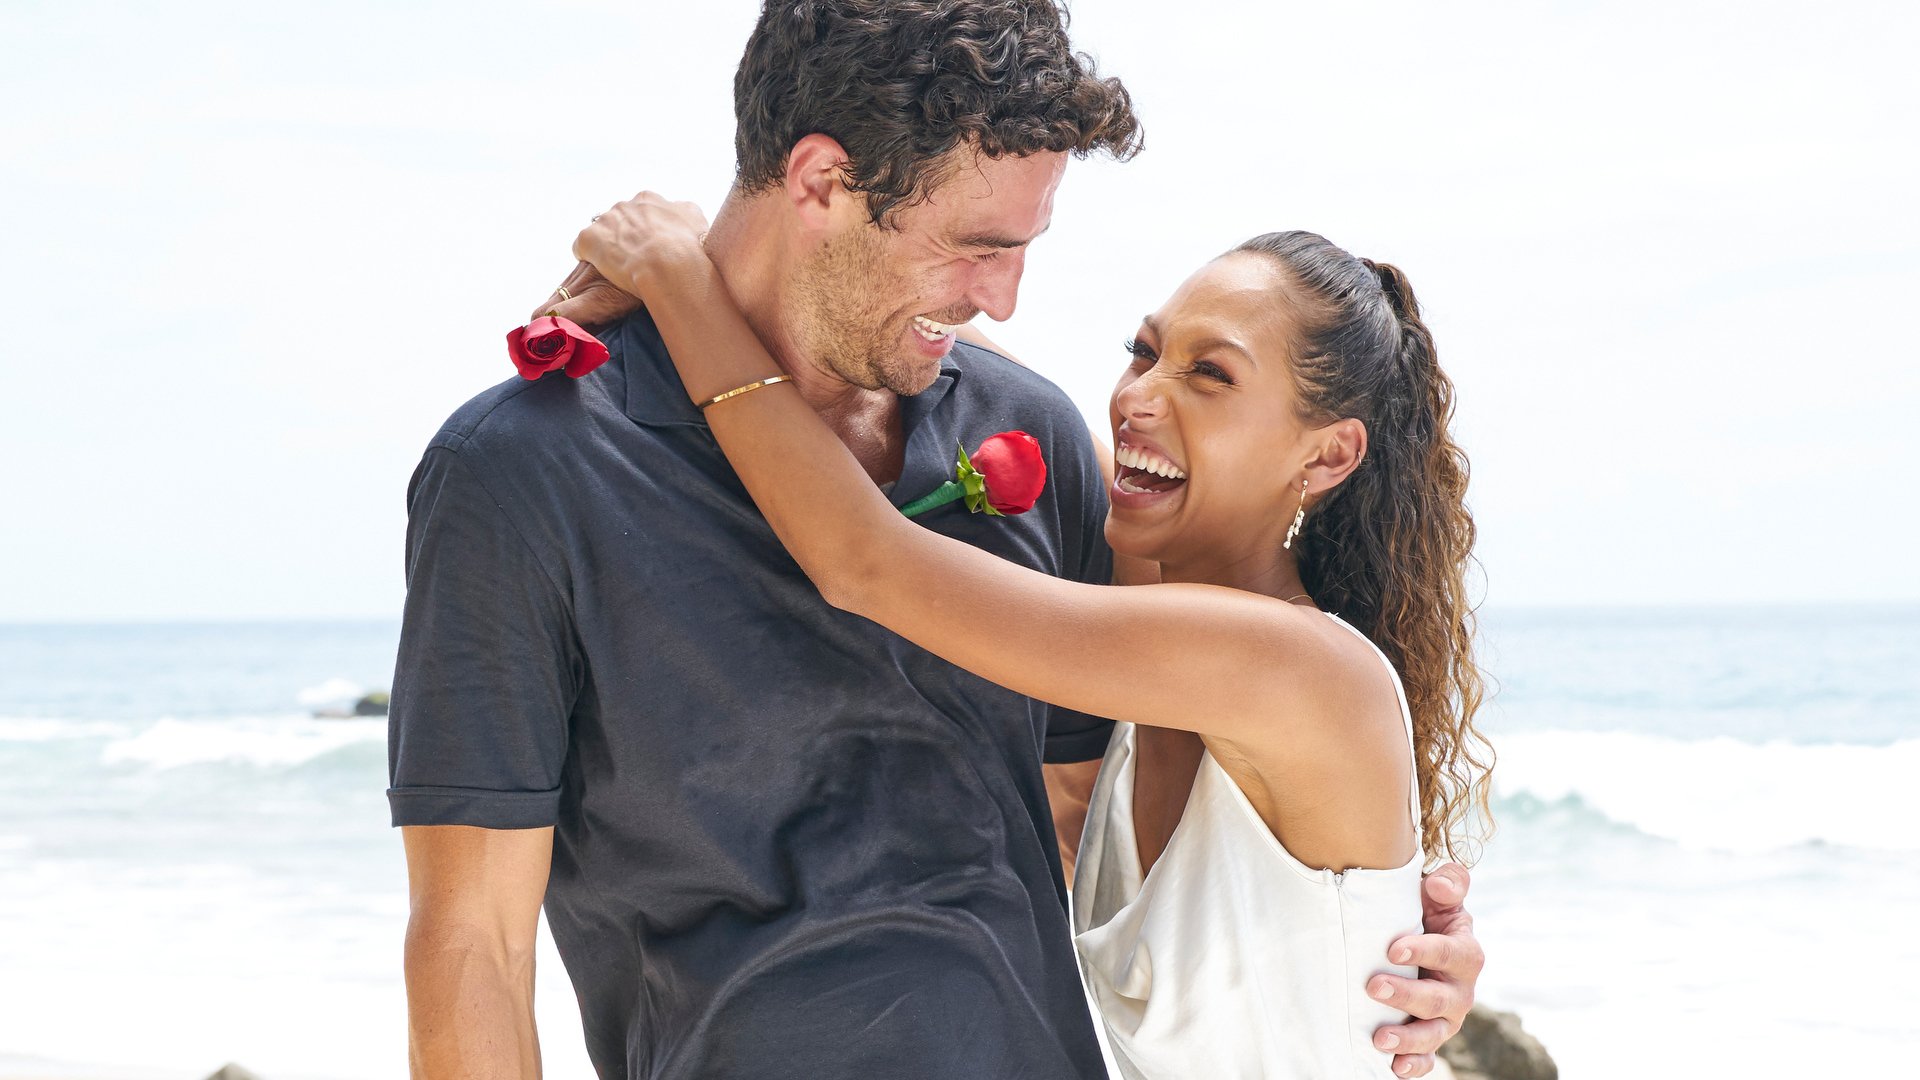 Joe Amabile and Serena Pitt laugh together after getting engaged in the ‘Bachelor in Paradise’ Season 7 finale in 2021